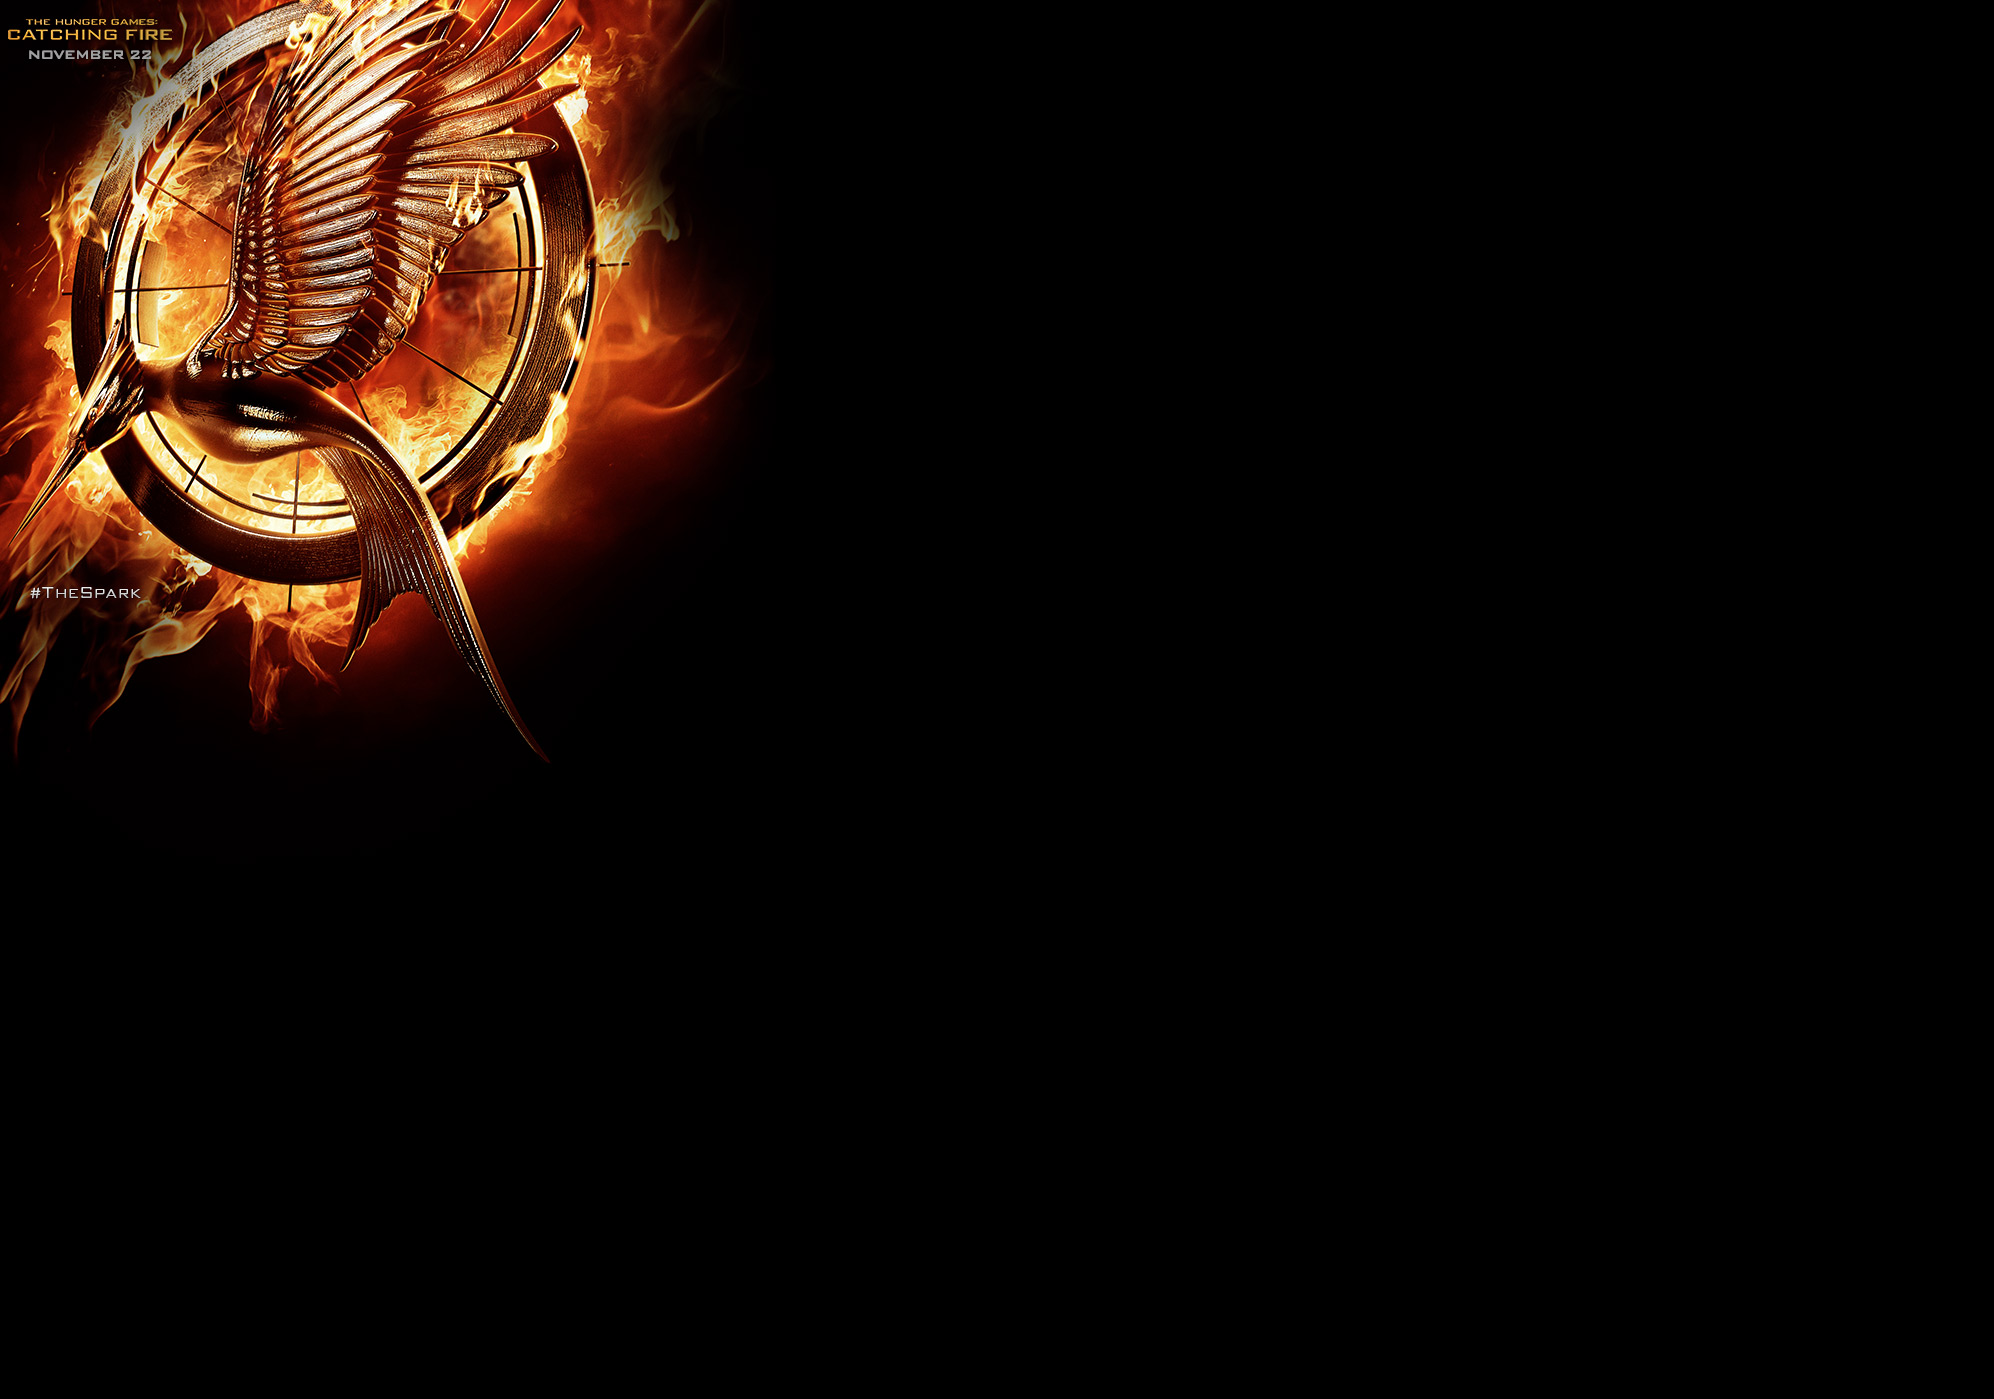 Catching Fire Teaser Poster Social Media Graphics